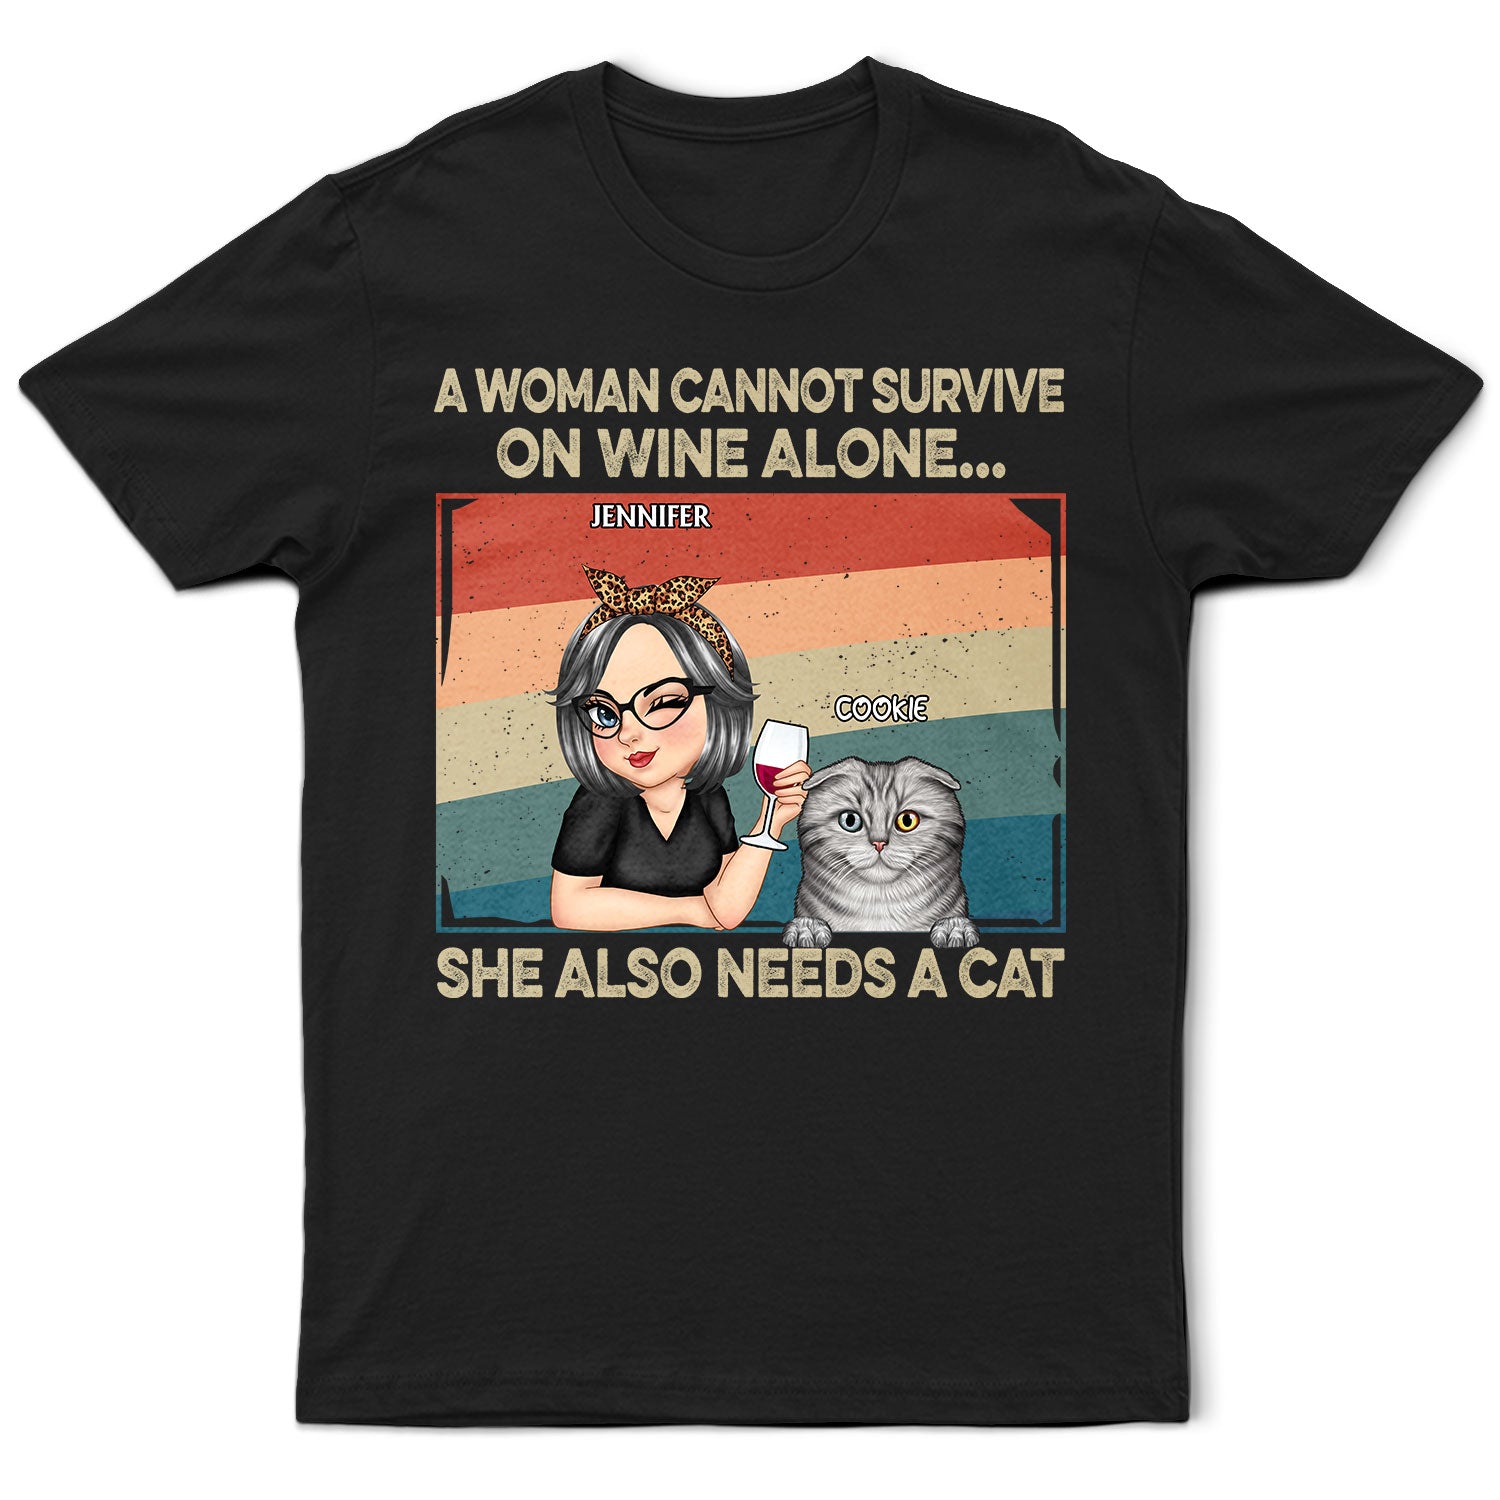 She Also Needs A Cat - Funny Gift For Cat Mom, Cat Lovers, Pet Lovers - Personalized T Shirt